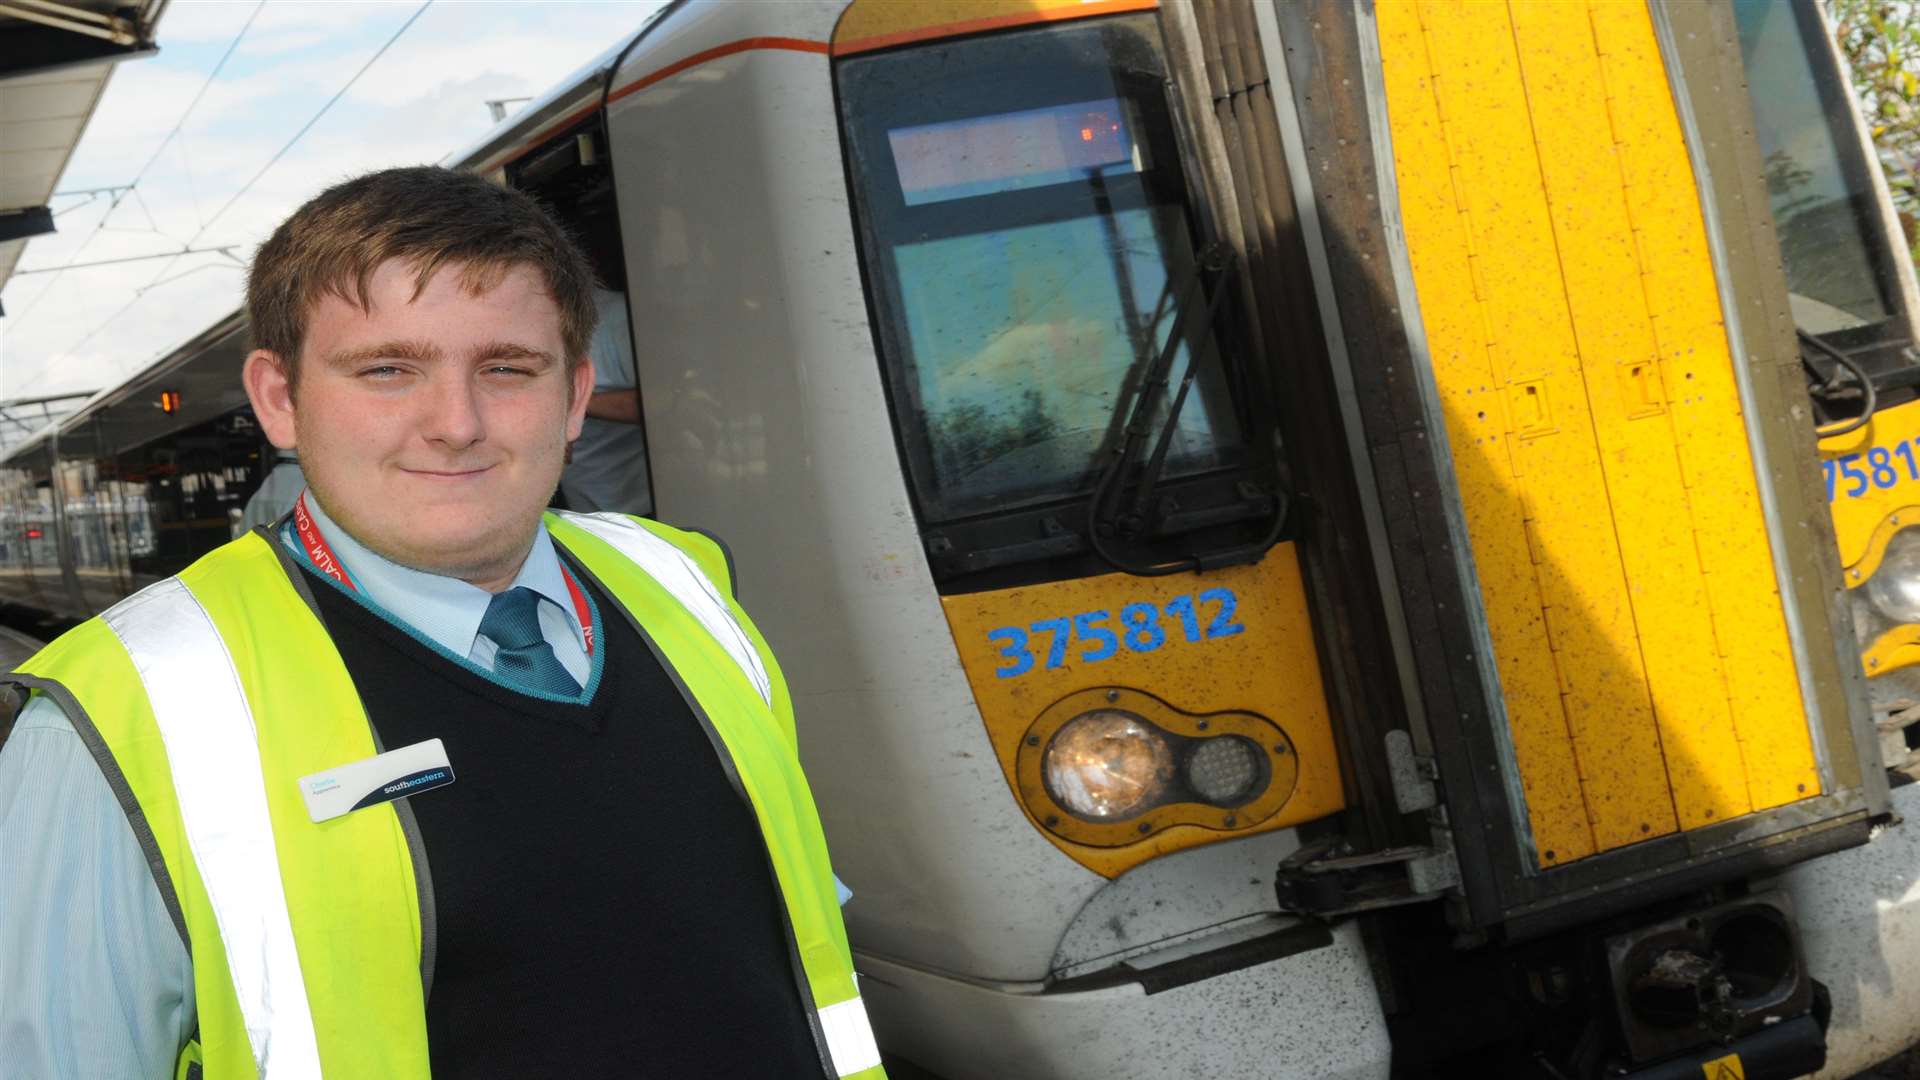 Charles White joined Southeastern as an apprentice after sixth form